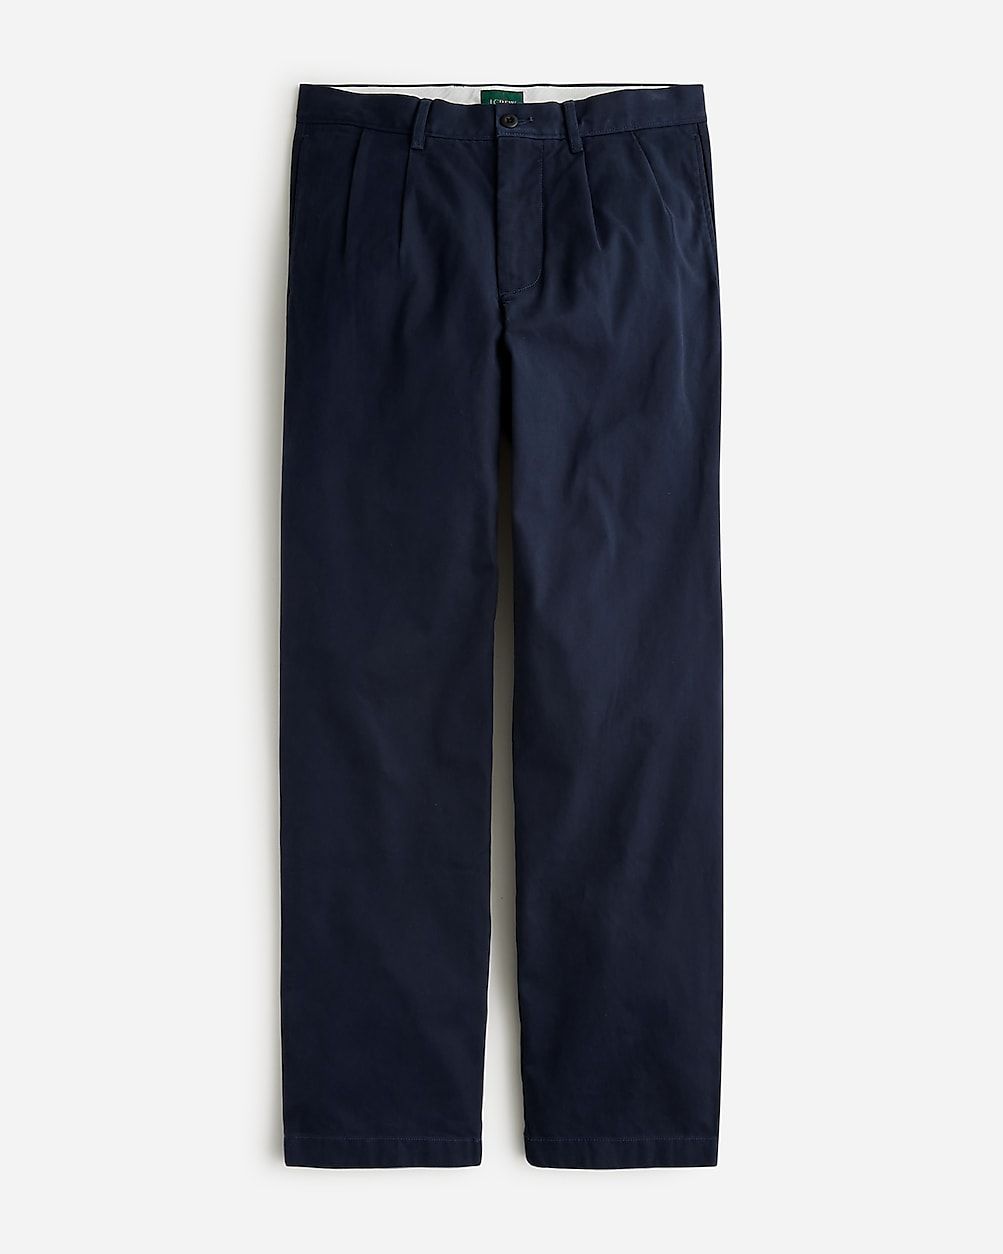 Classic double-pleated chino pant | J.Crew US